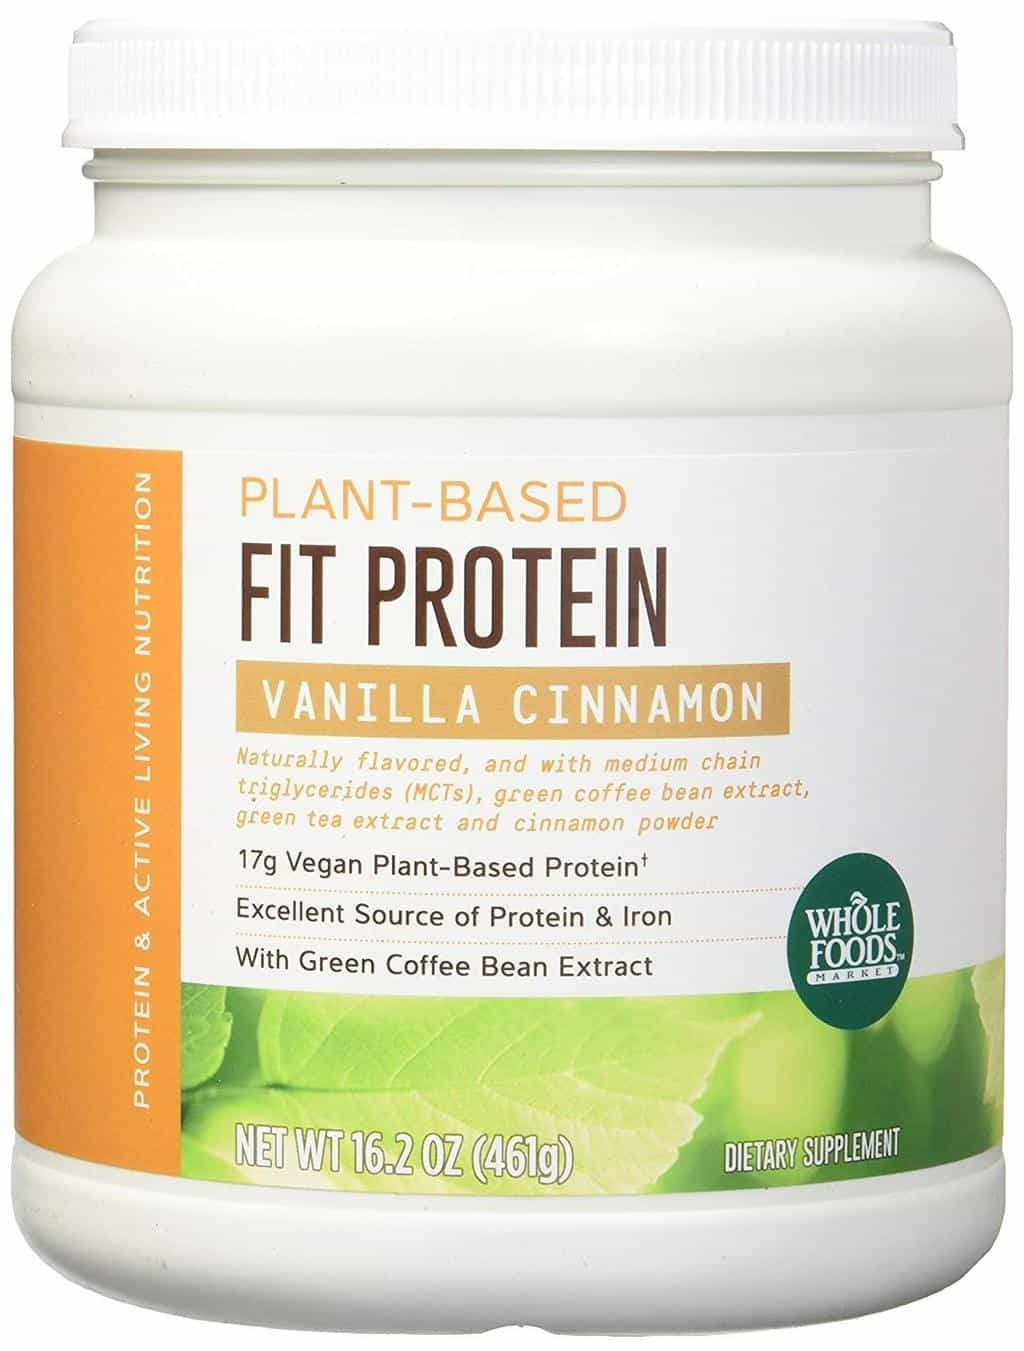 Whole Foods Vegetarian Protein Powder
 Whole Foods Market Plant Based FIT Protein Review